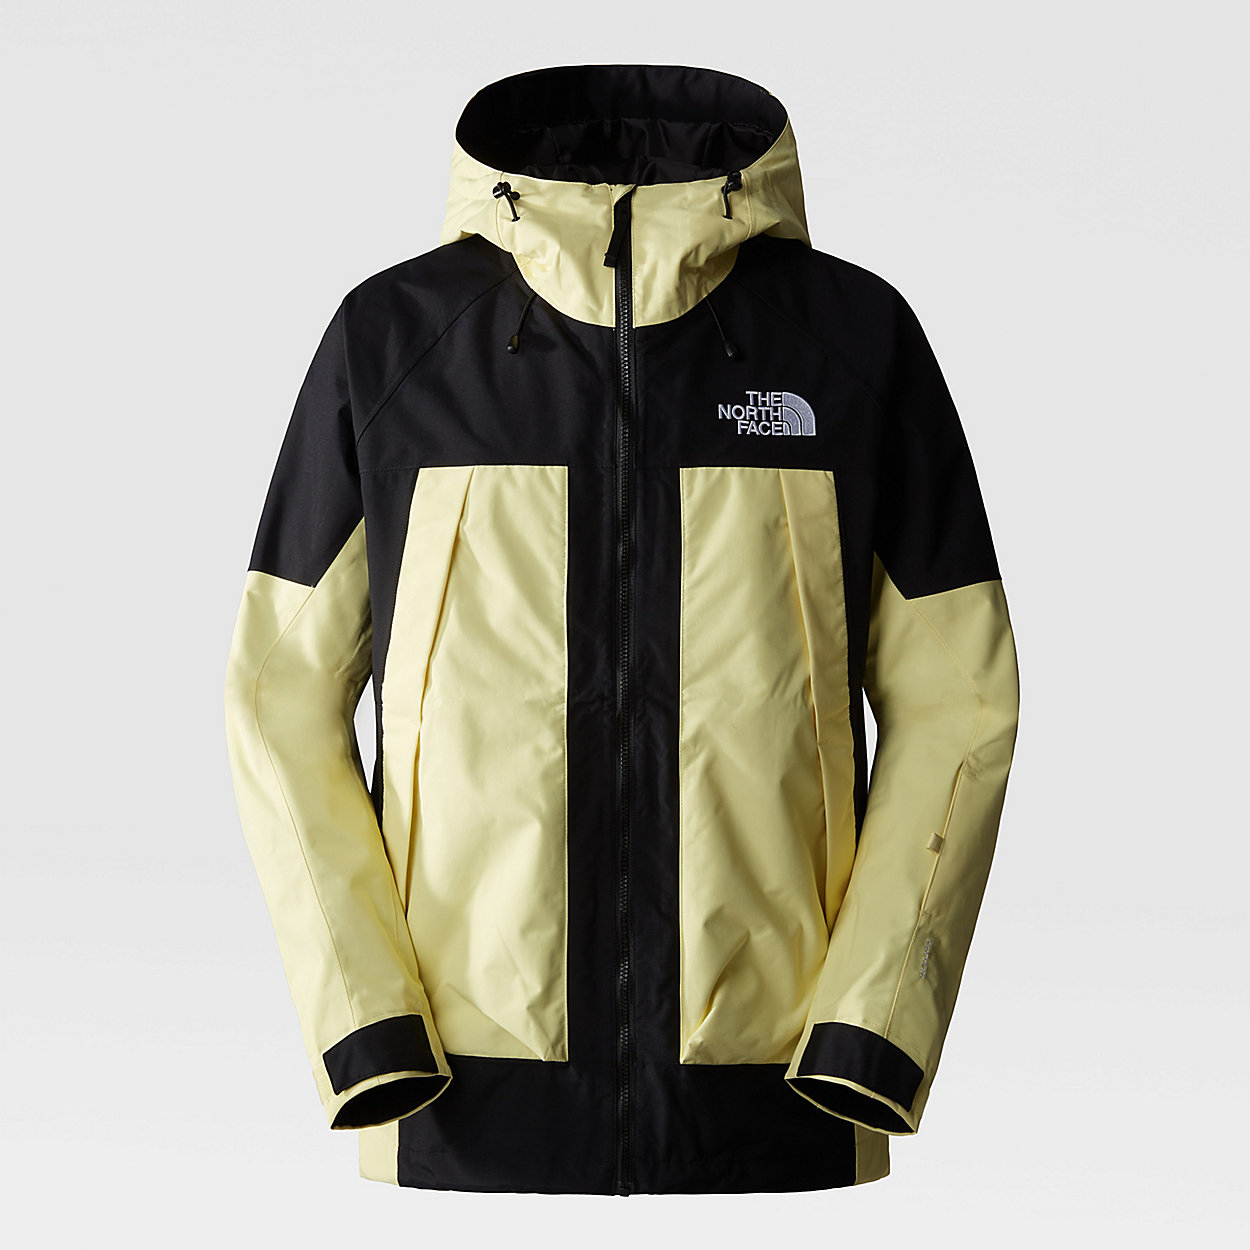 Unlock Wilderness' choice in the Peak Performance Vs North Face comparison, the Balfron Jacket by The North Face